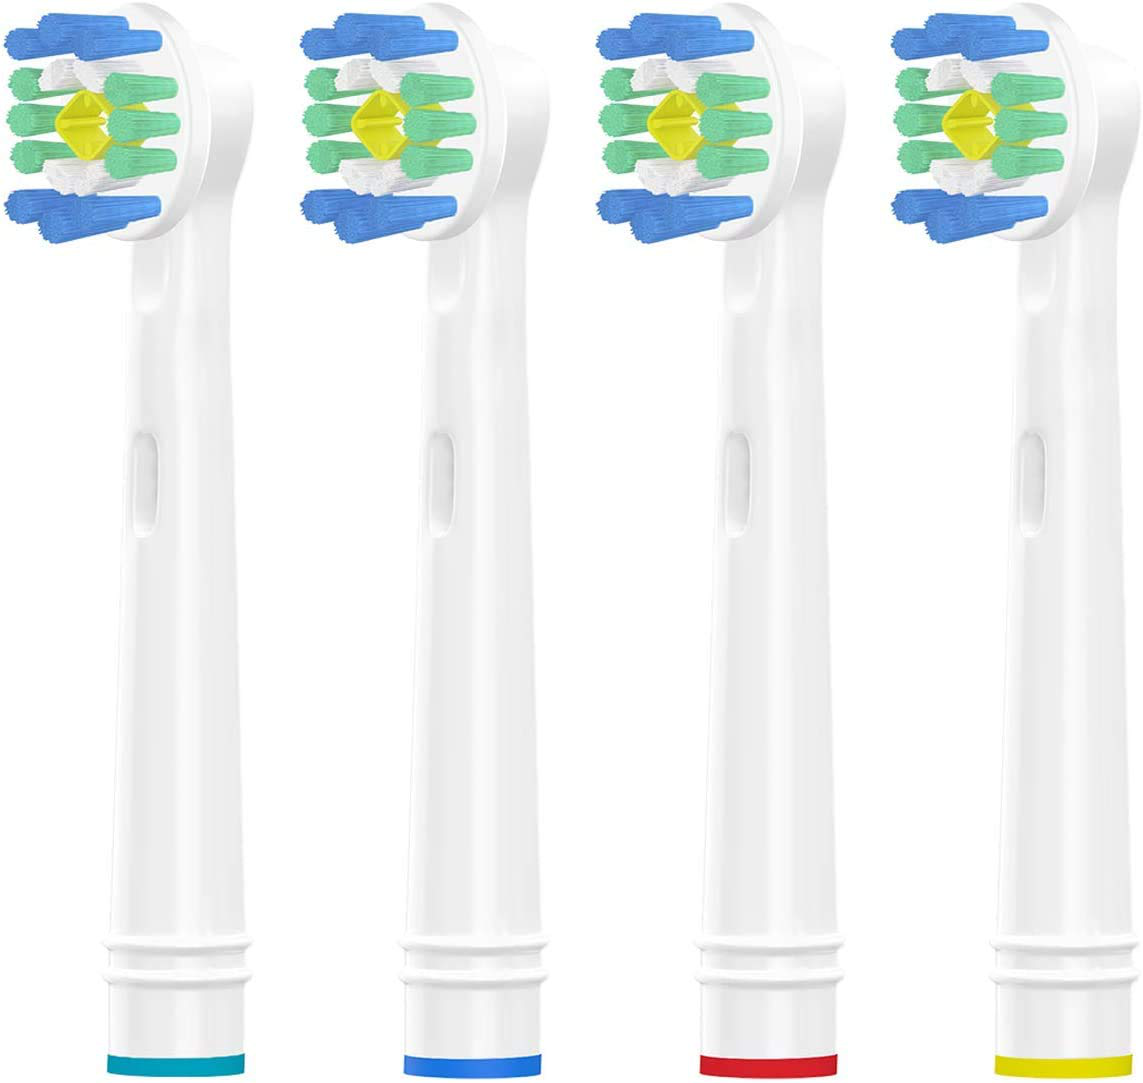 VINFANY 4PCS Replacement Brush Heads for Oral B, Refills Toothbrush Heads for Oral-B Electric Toothbrush, Polishes to Remove Stains for Whiter Teeth